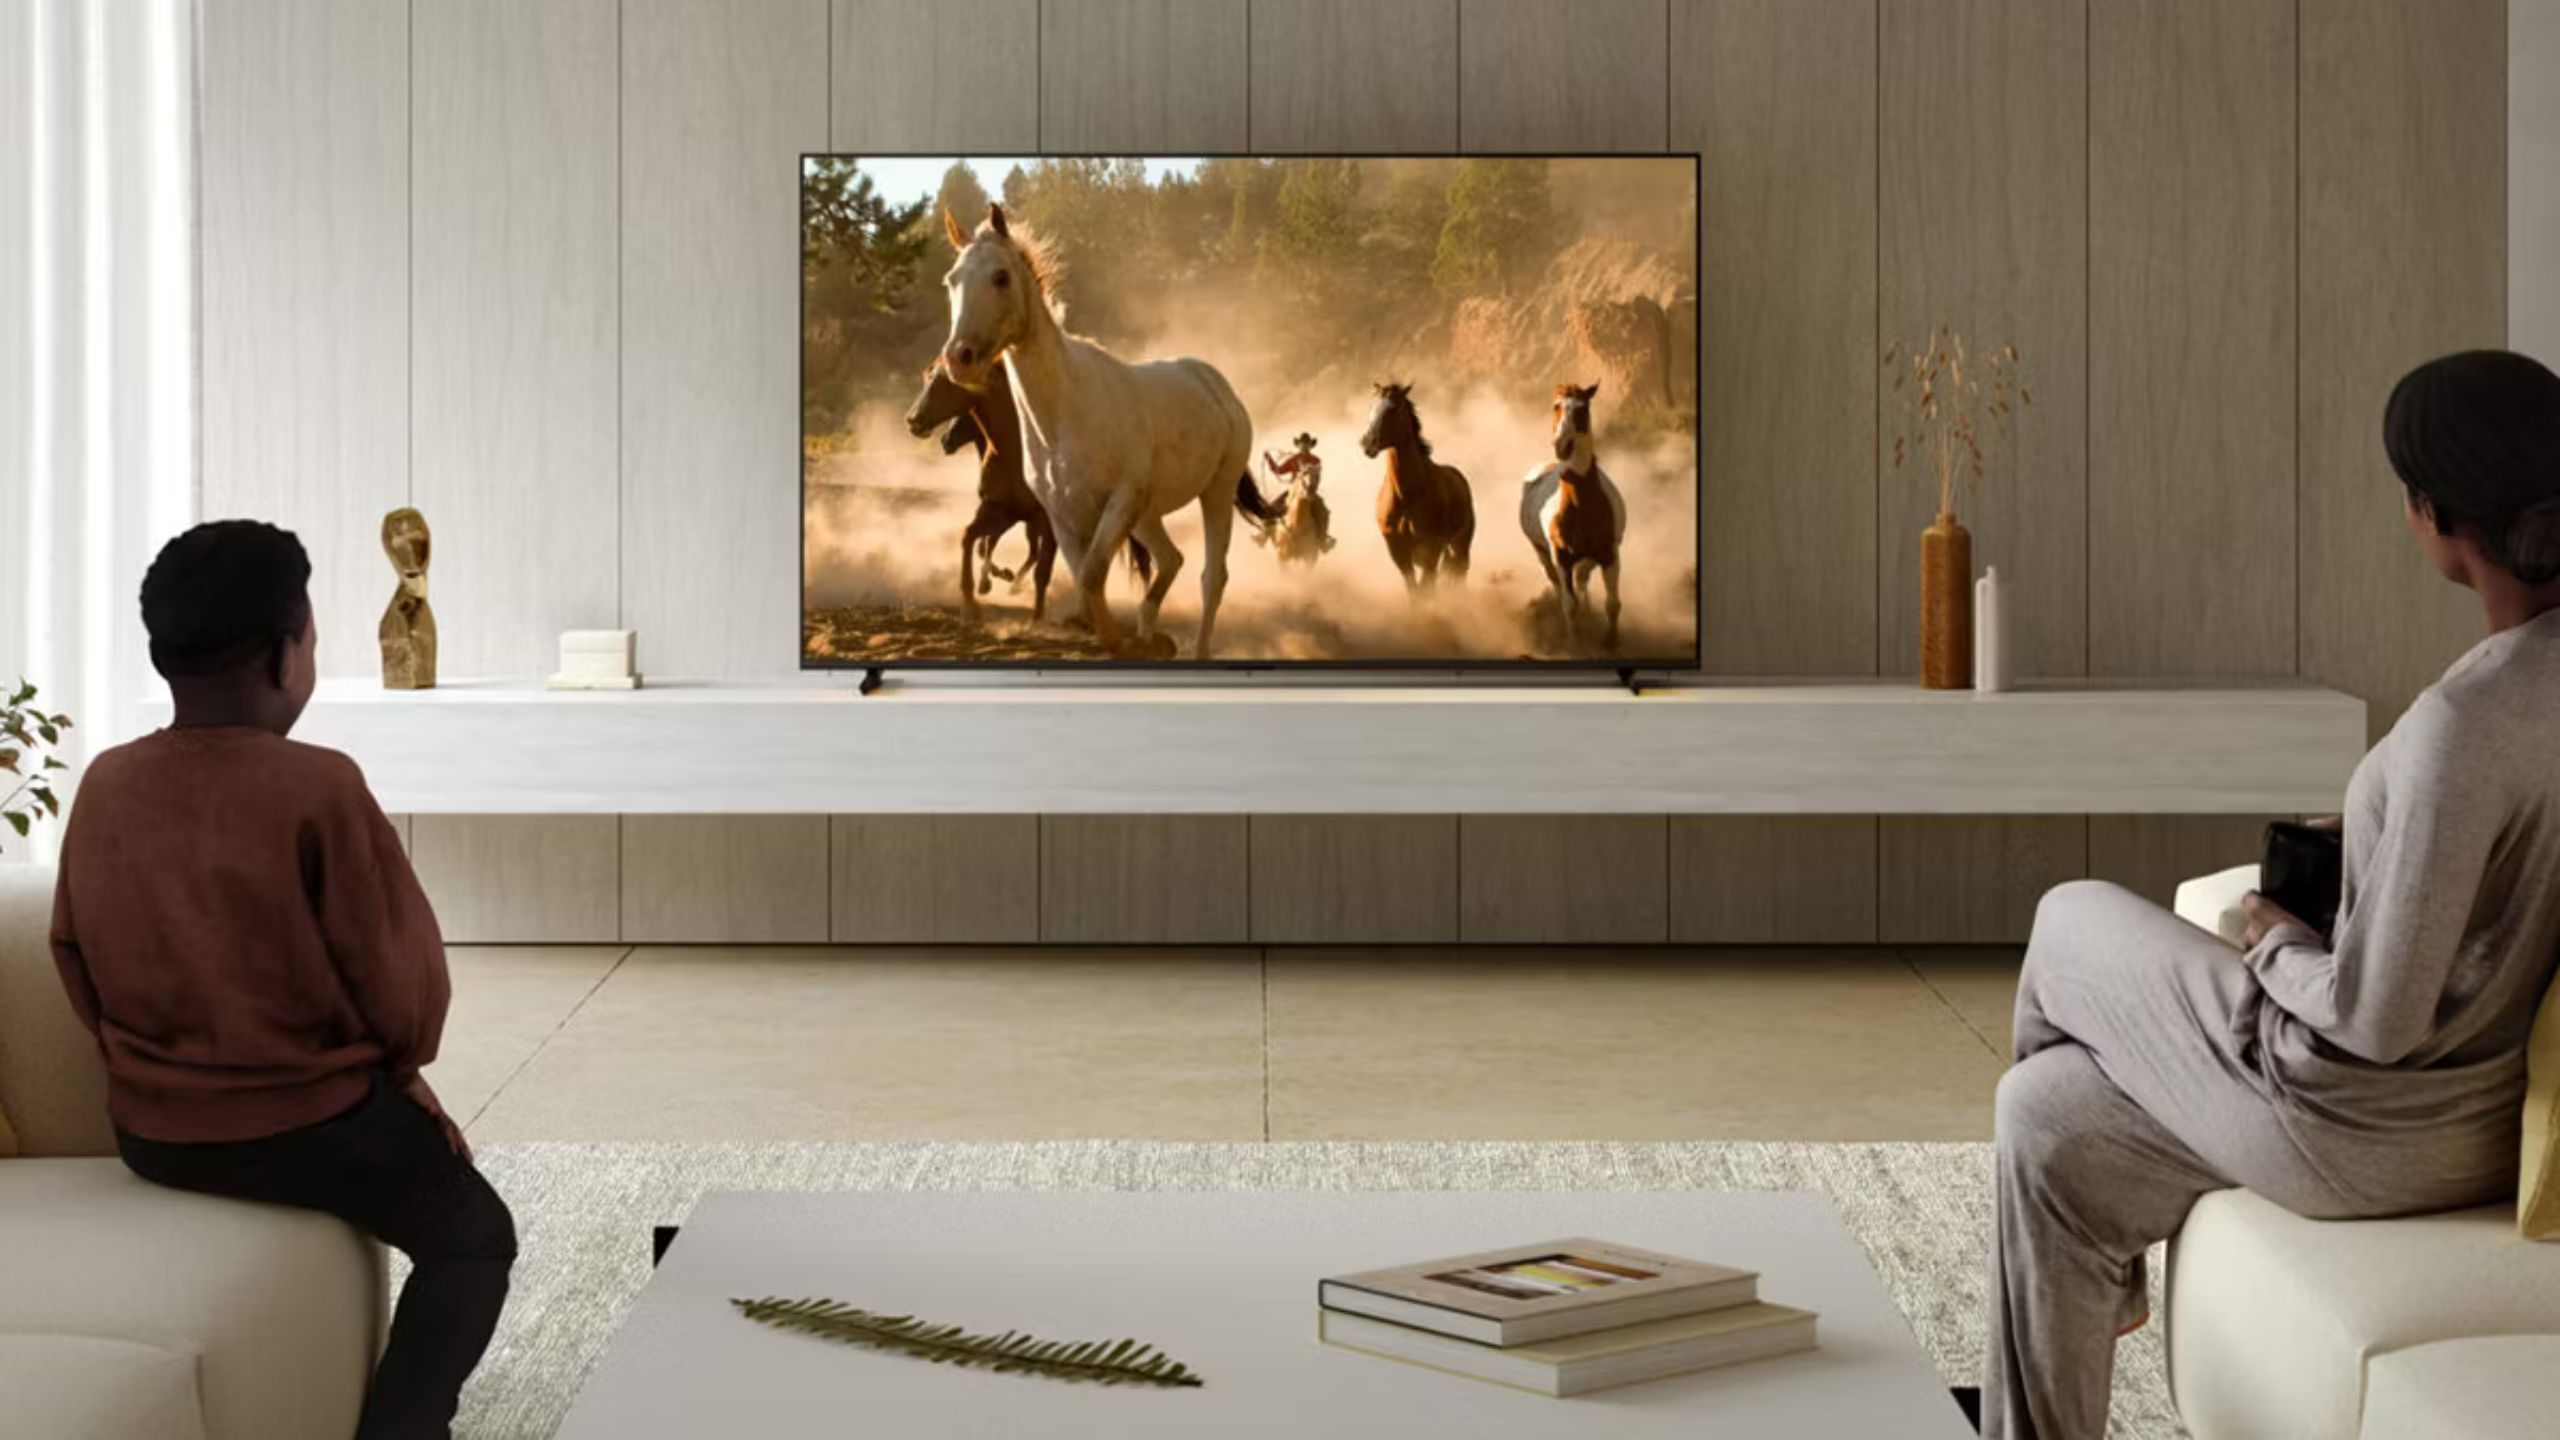 Sony Bravia XR TV range 2023 watched by woman and young boy